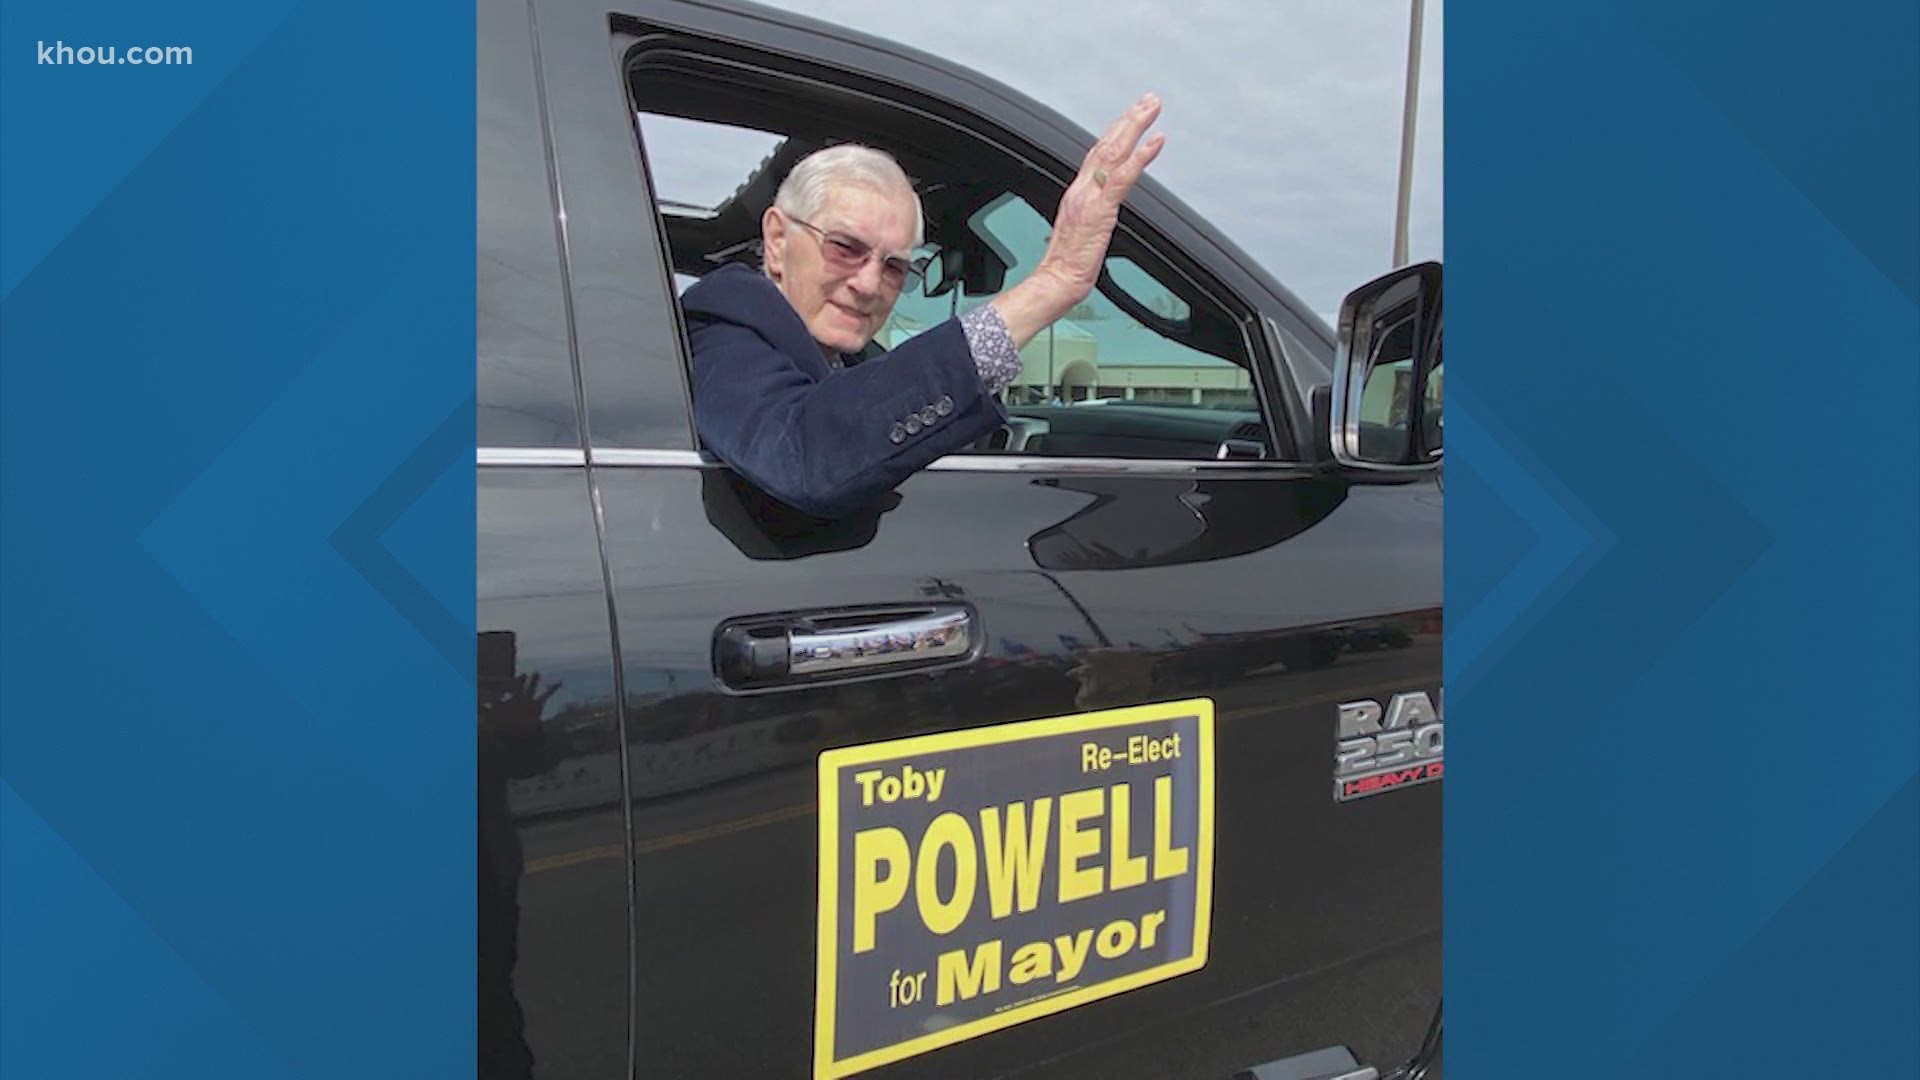 Mayor Toby Powell of Conroe, Texas died over the weekend after battling with cancer for several years.